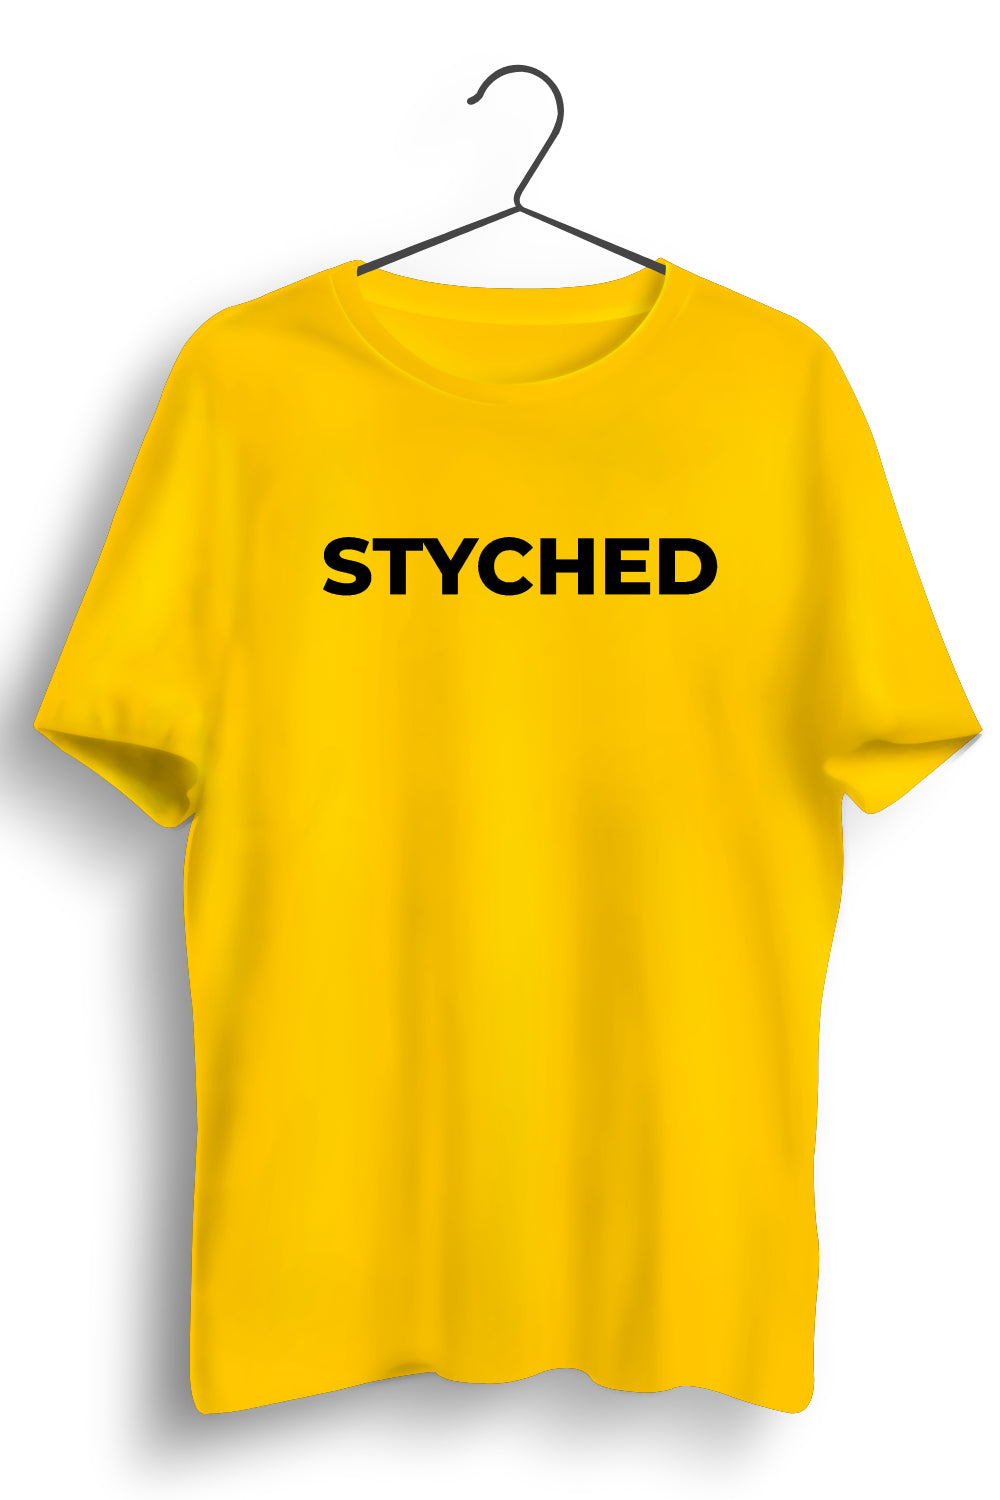 Styched Font Yellow Tshirt